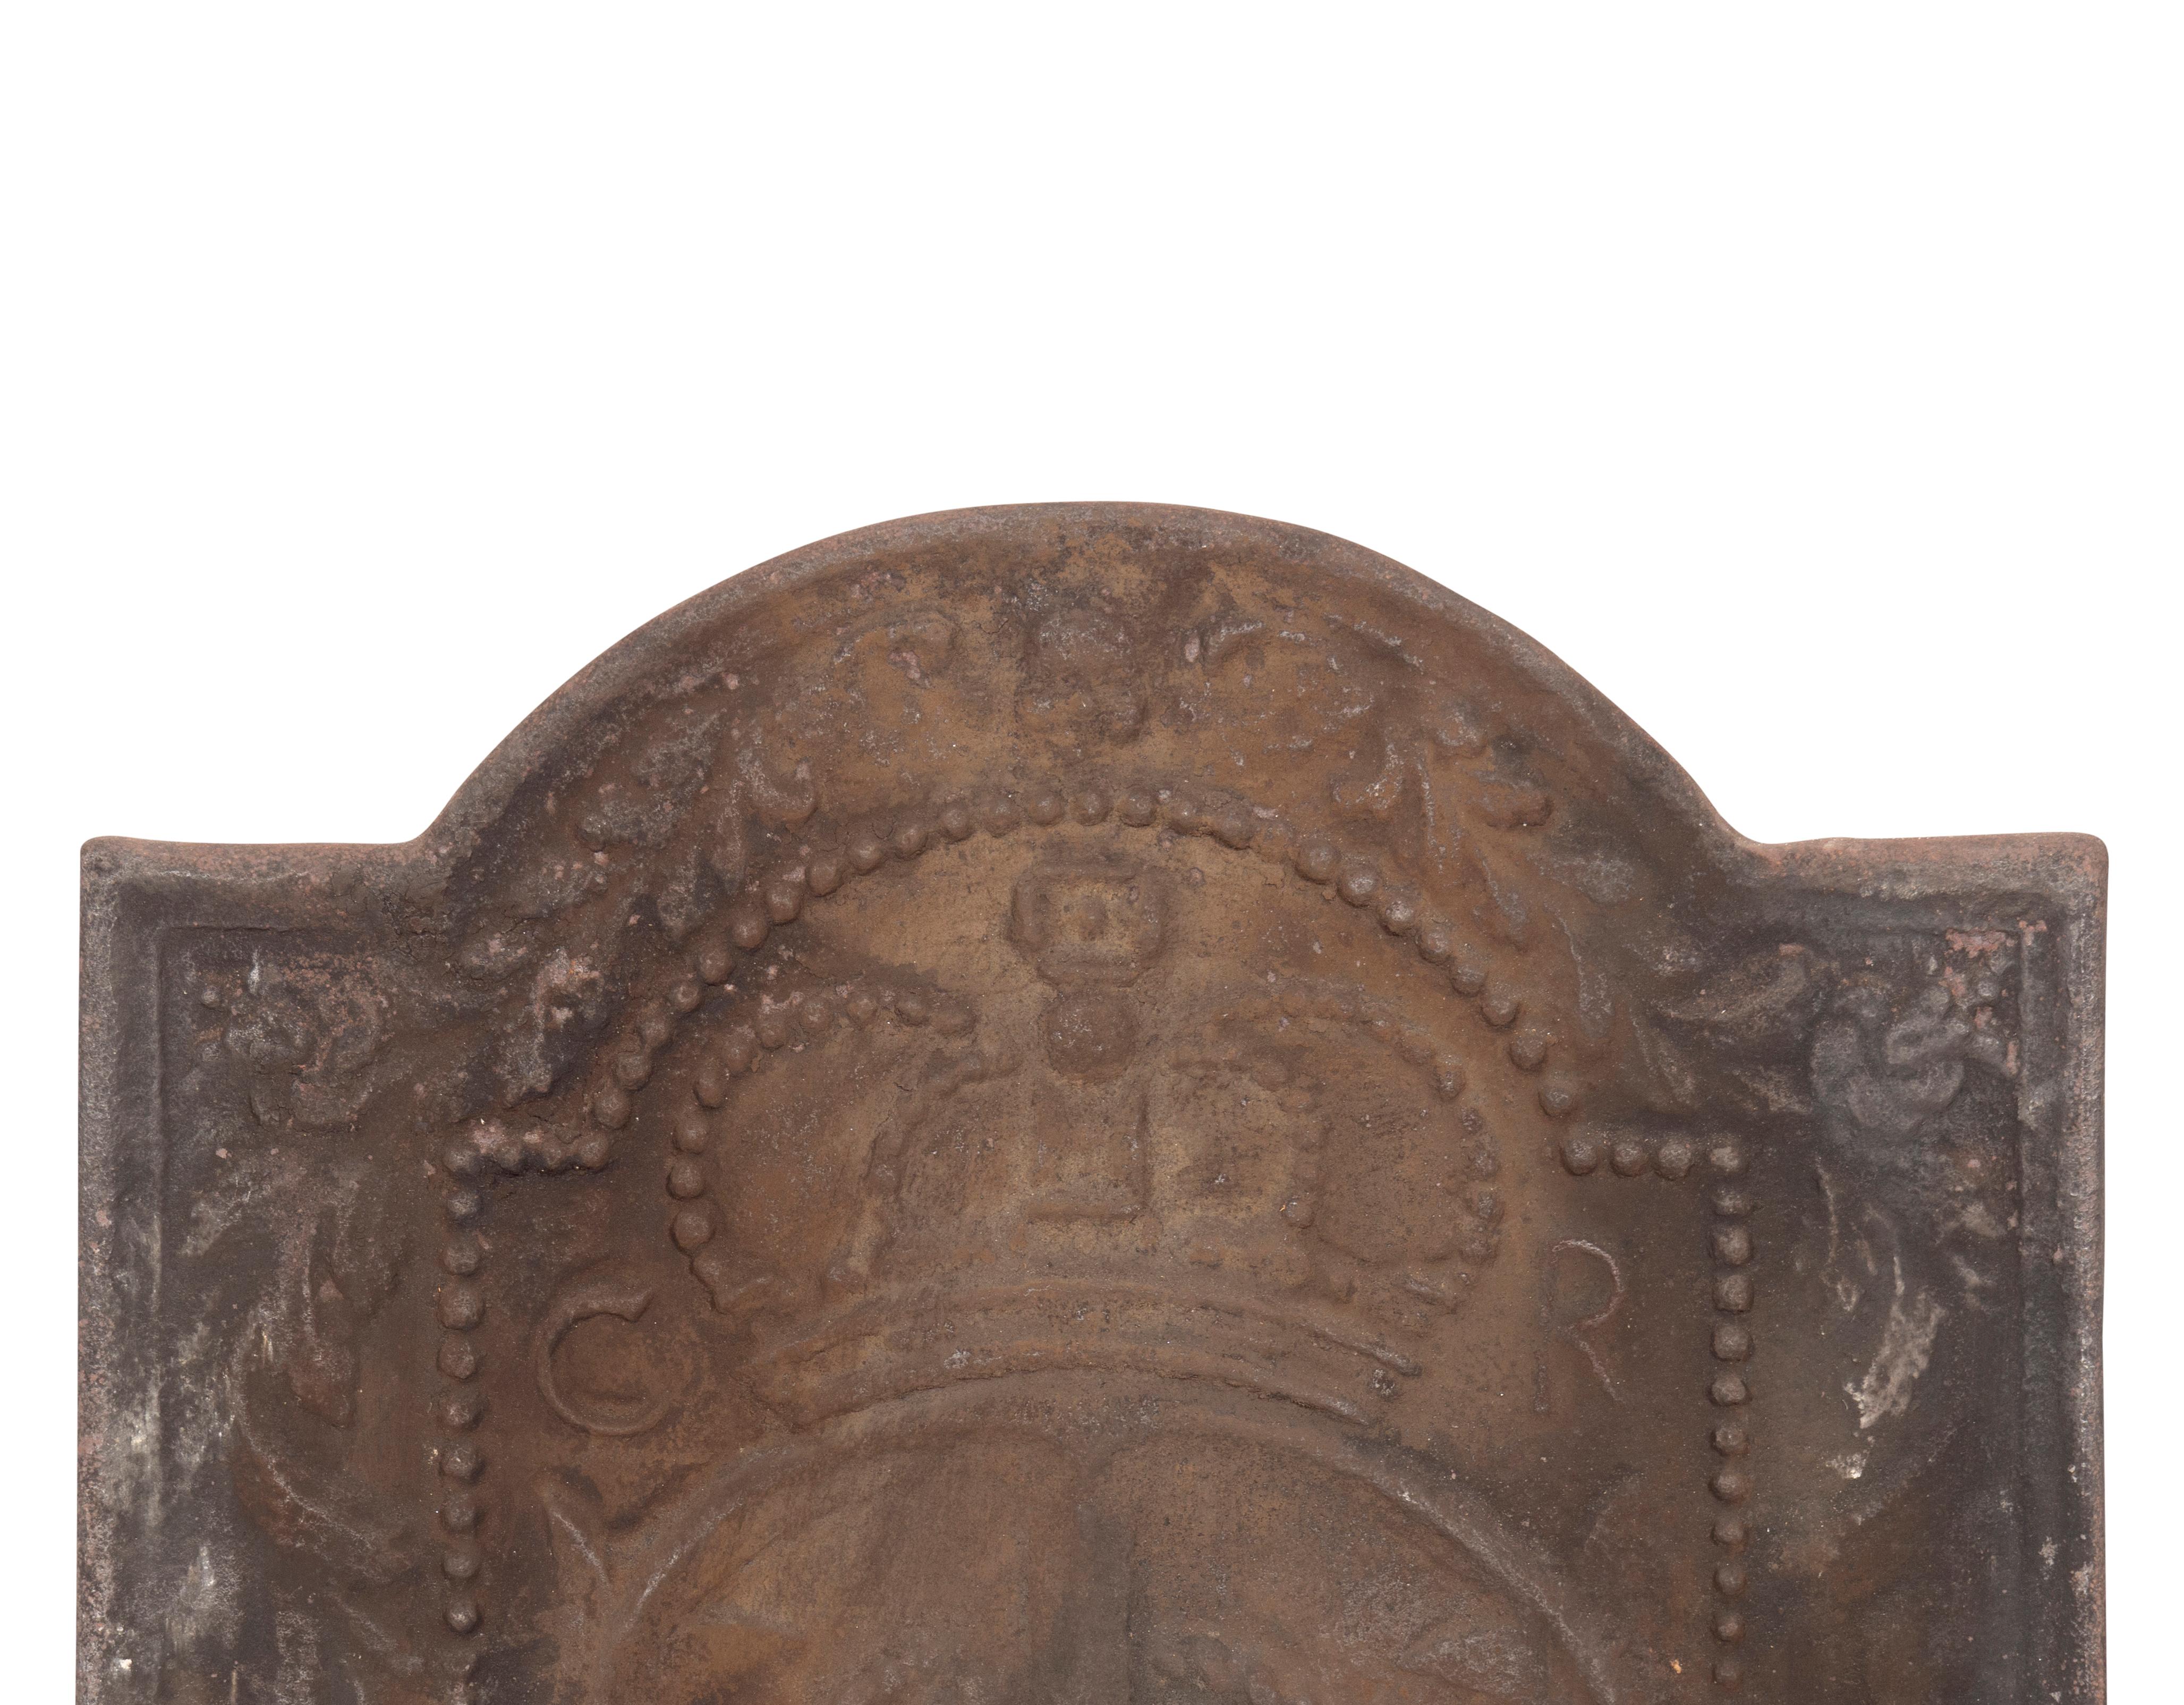 Arched top with cast royal crown and anchor with rope and initials C for Charles and R for rex or king.